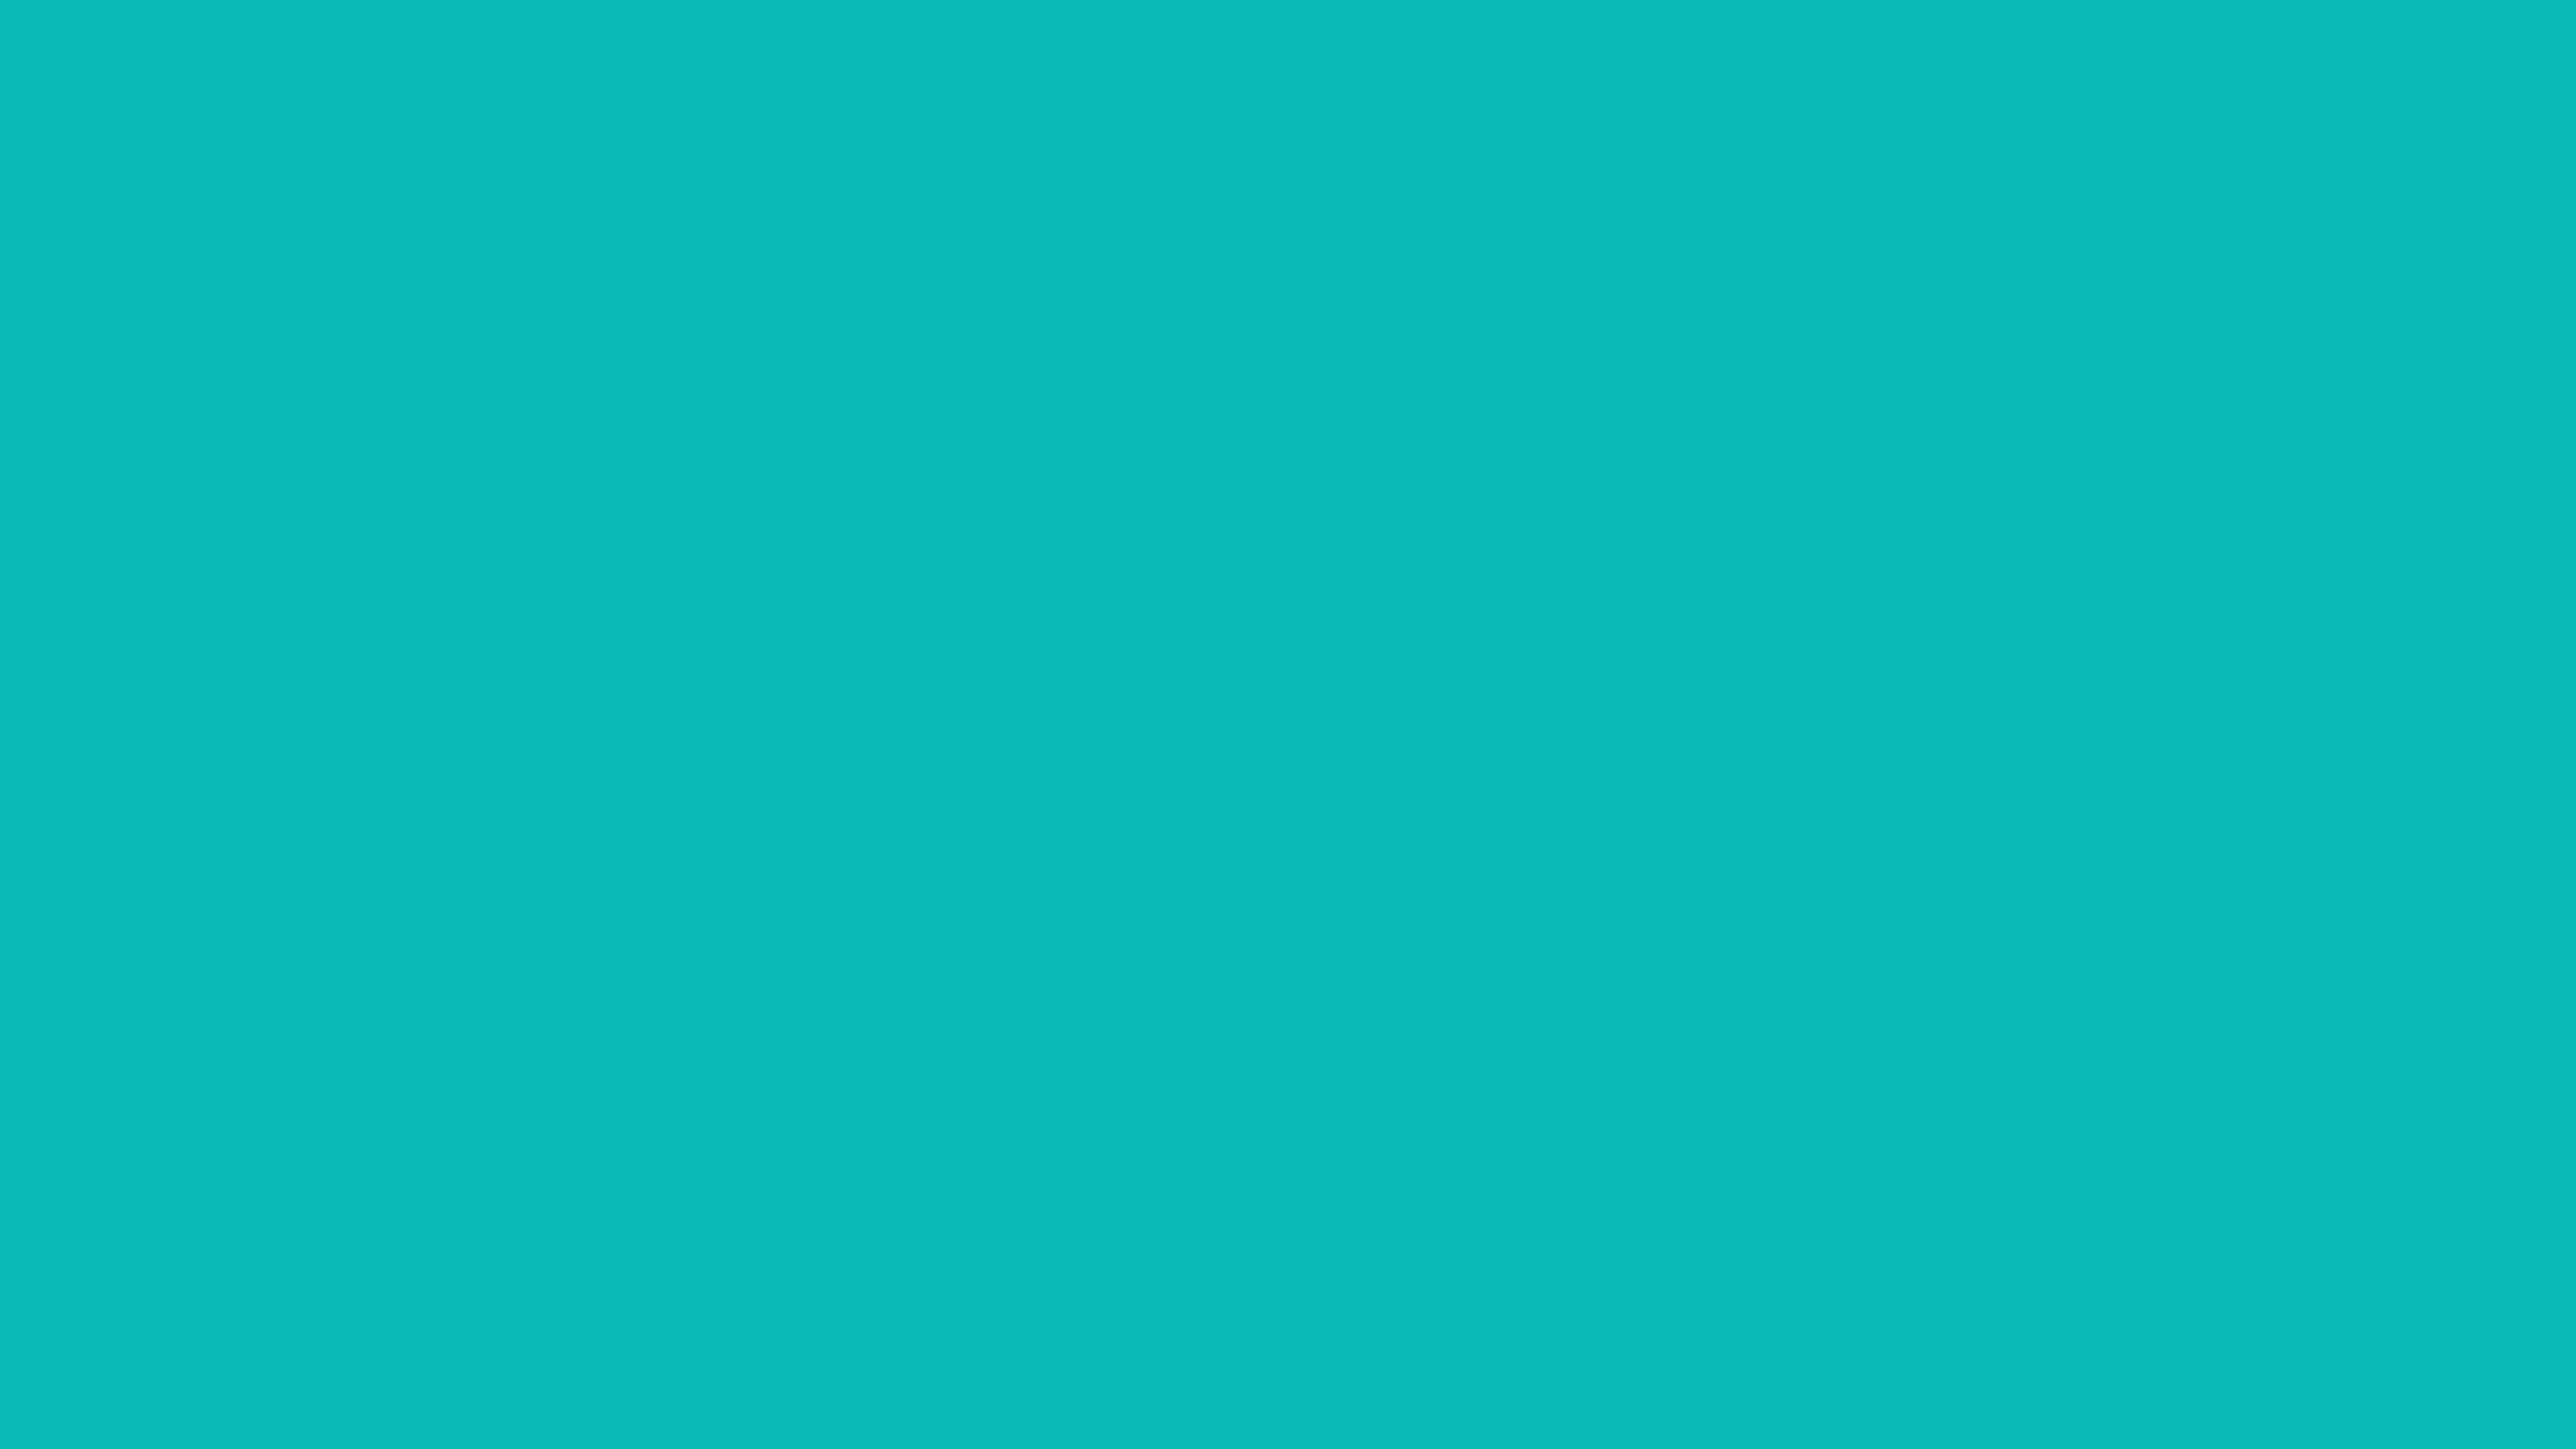 3840x2160 Tiffany Blue Solid Color Background